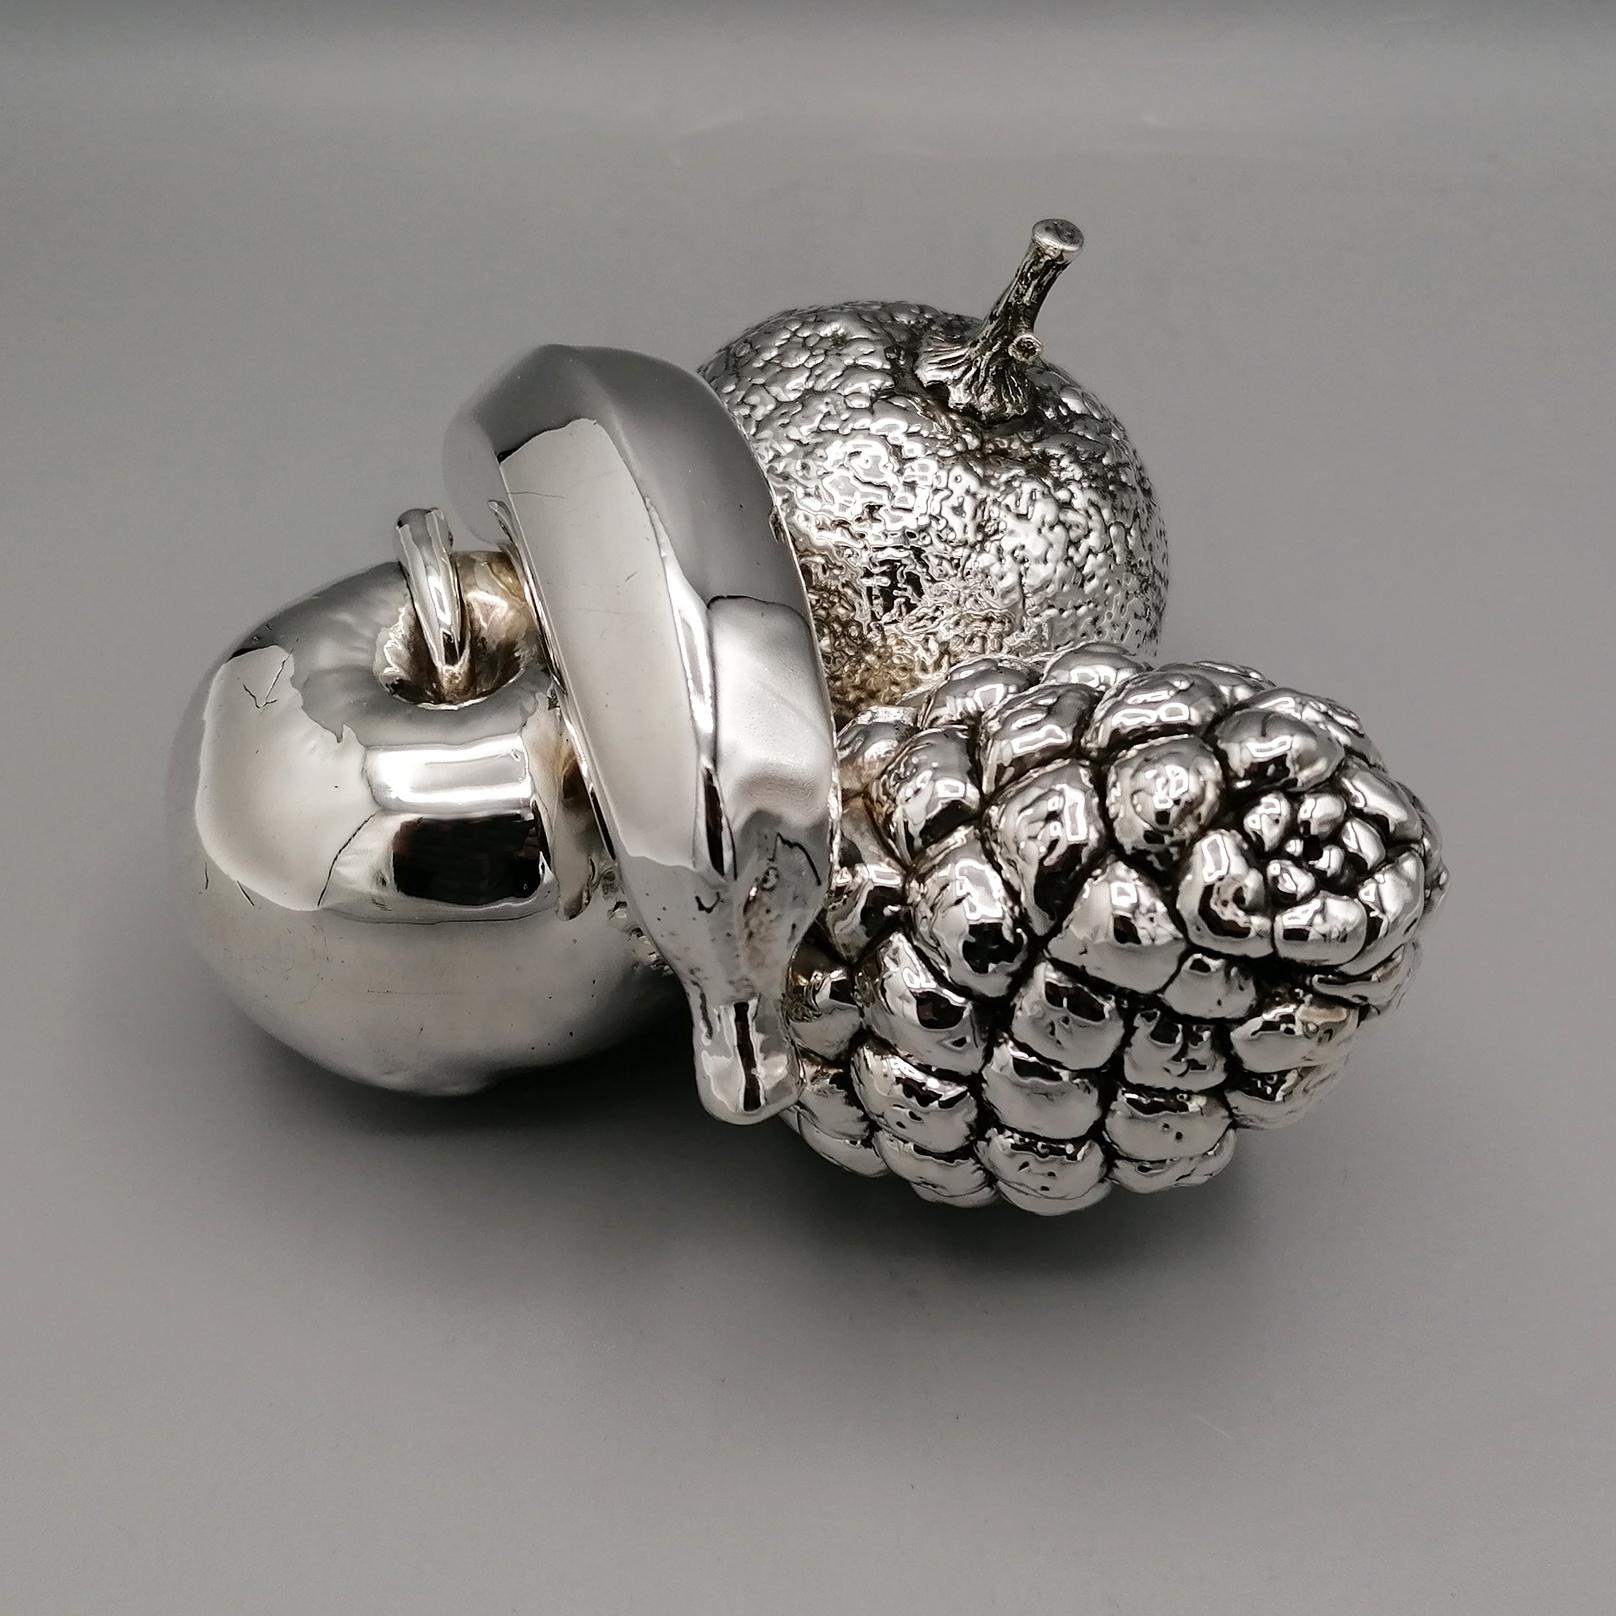 Fruit set - orange apple banana pine cone - in 999 silver
Italy, a country that produces great wines and an ancient agricultural tradition, could not fail to dedicate its art also to create prestigious objects concerning this excellence for example